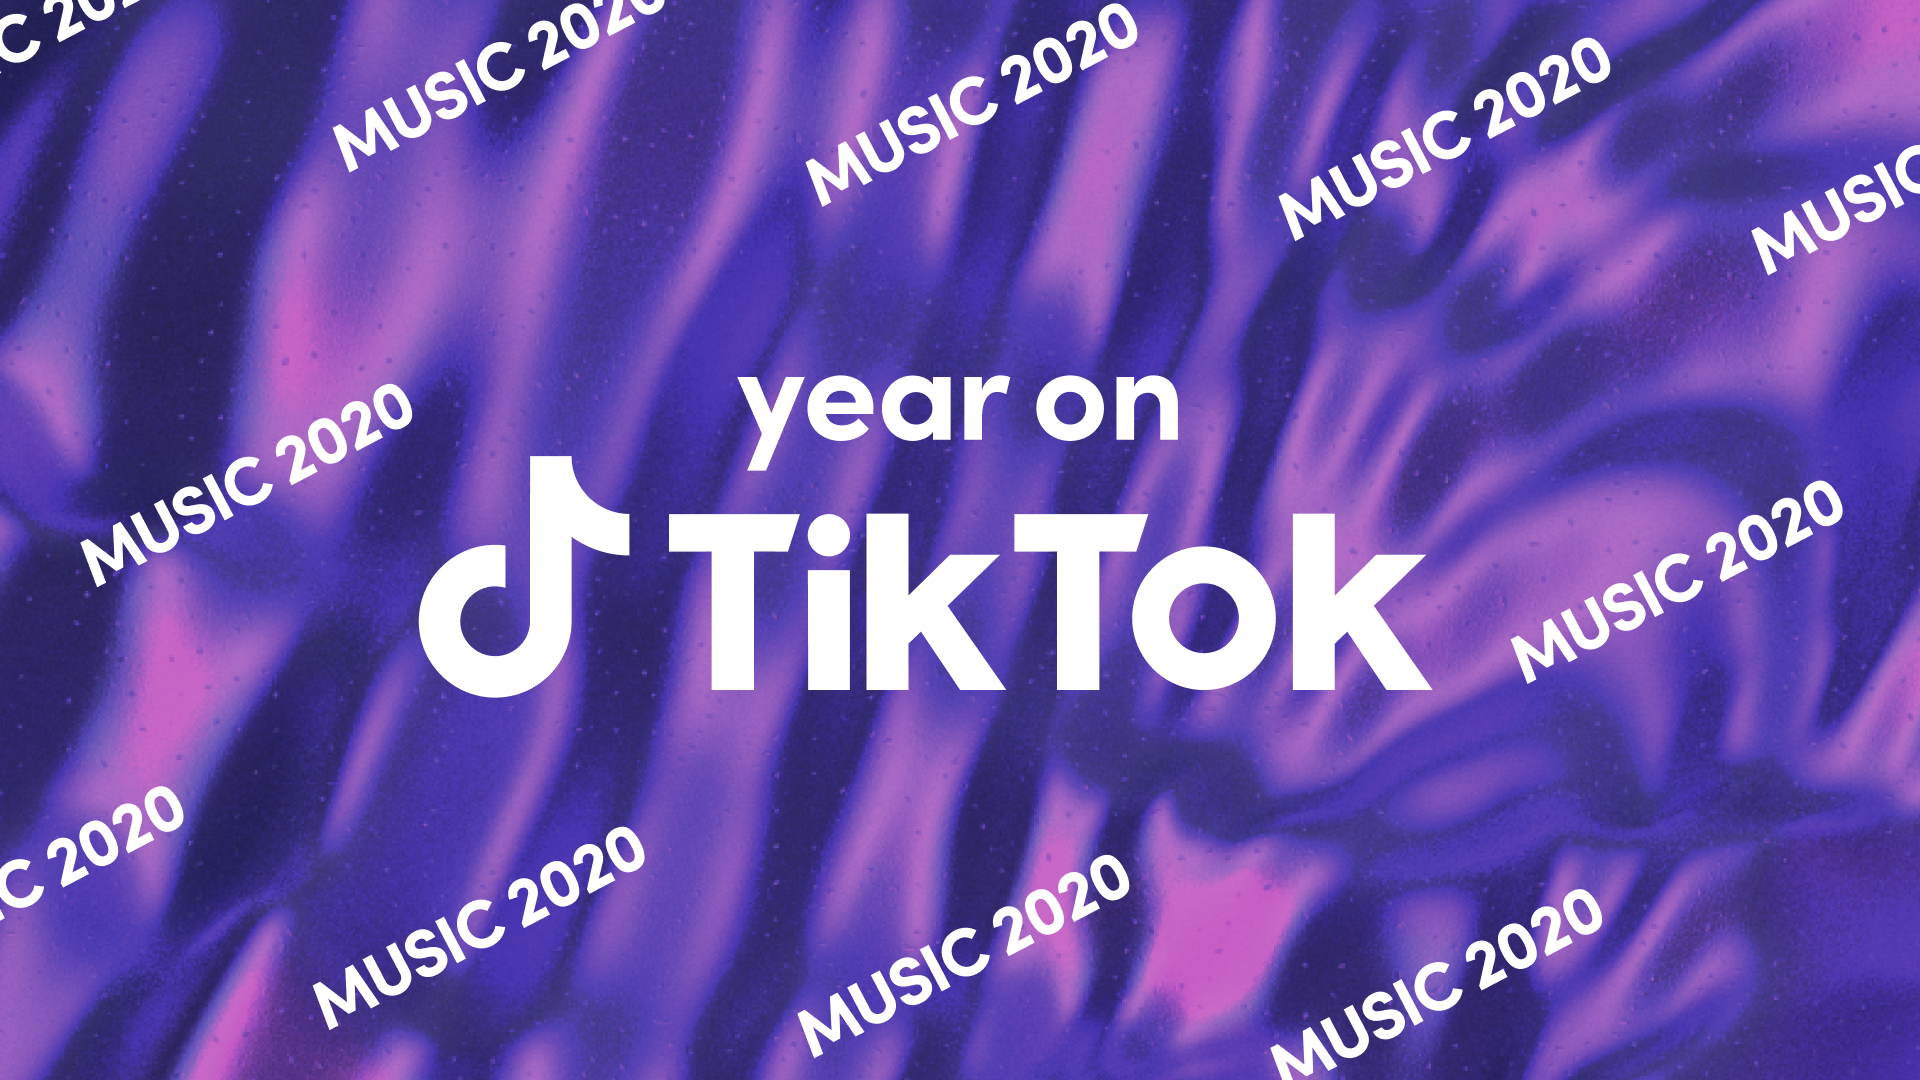 Year on TikTok: Music 2020 – Celebrating Culture With Music